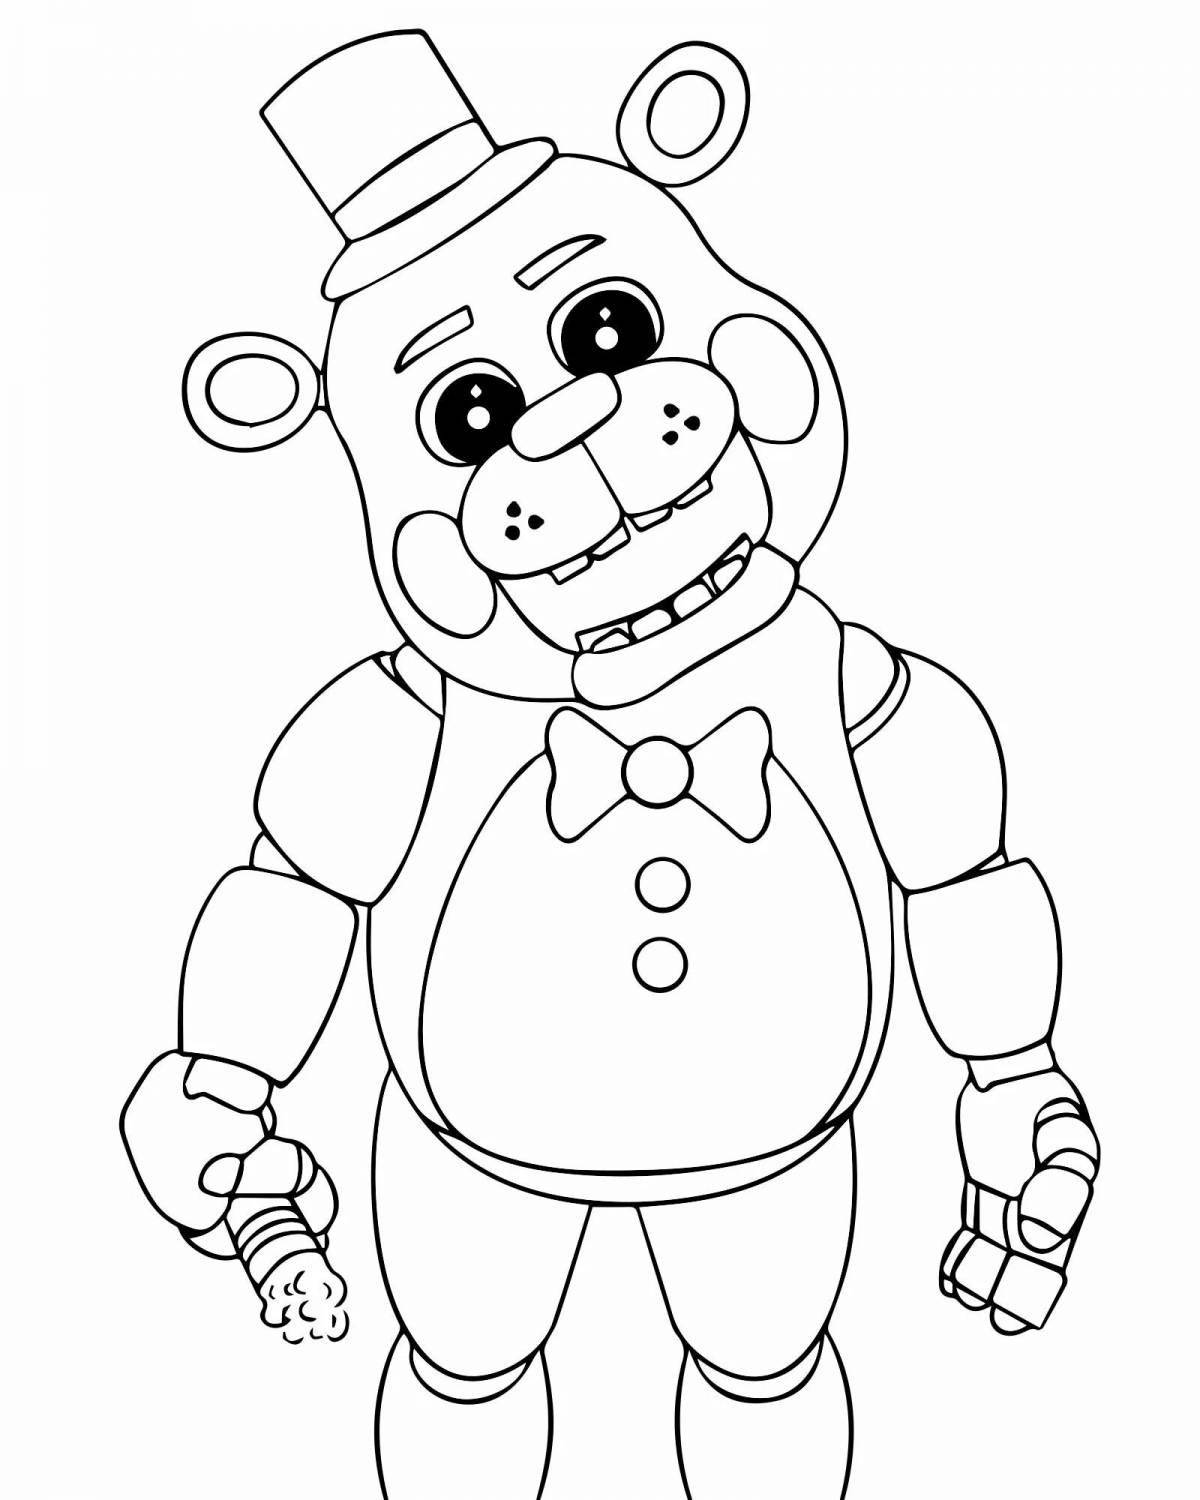 Animated freddy fighttime coloring page